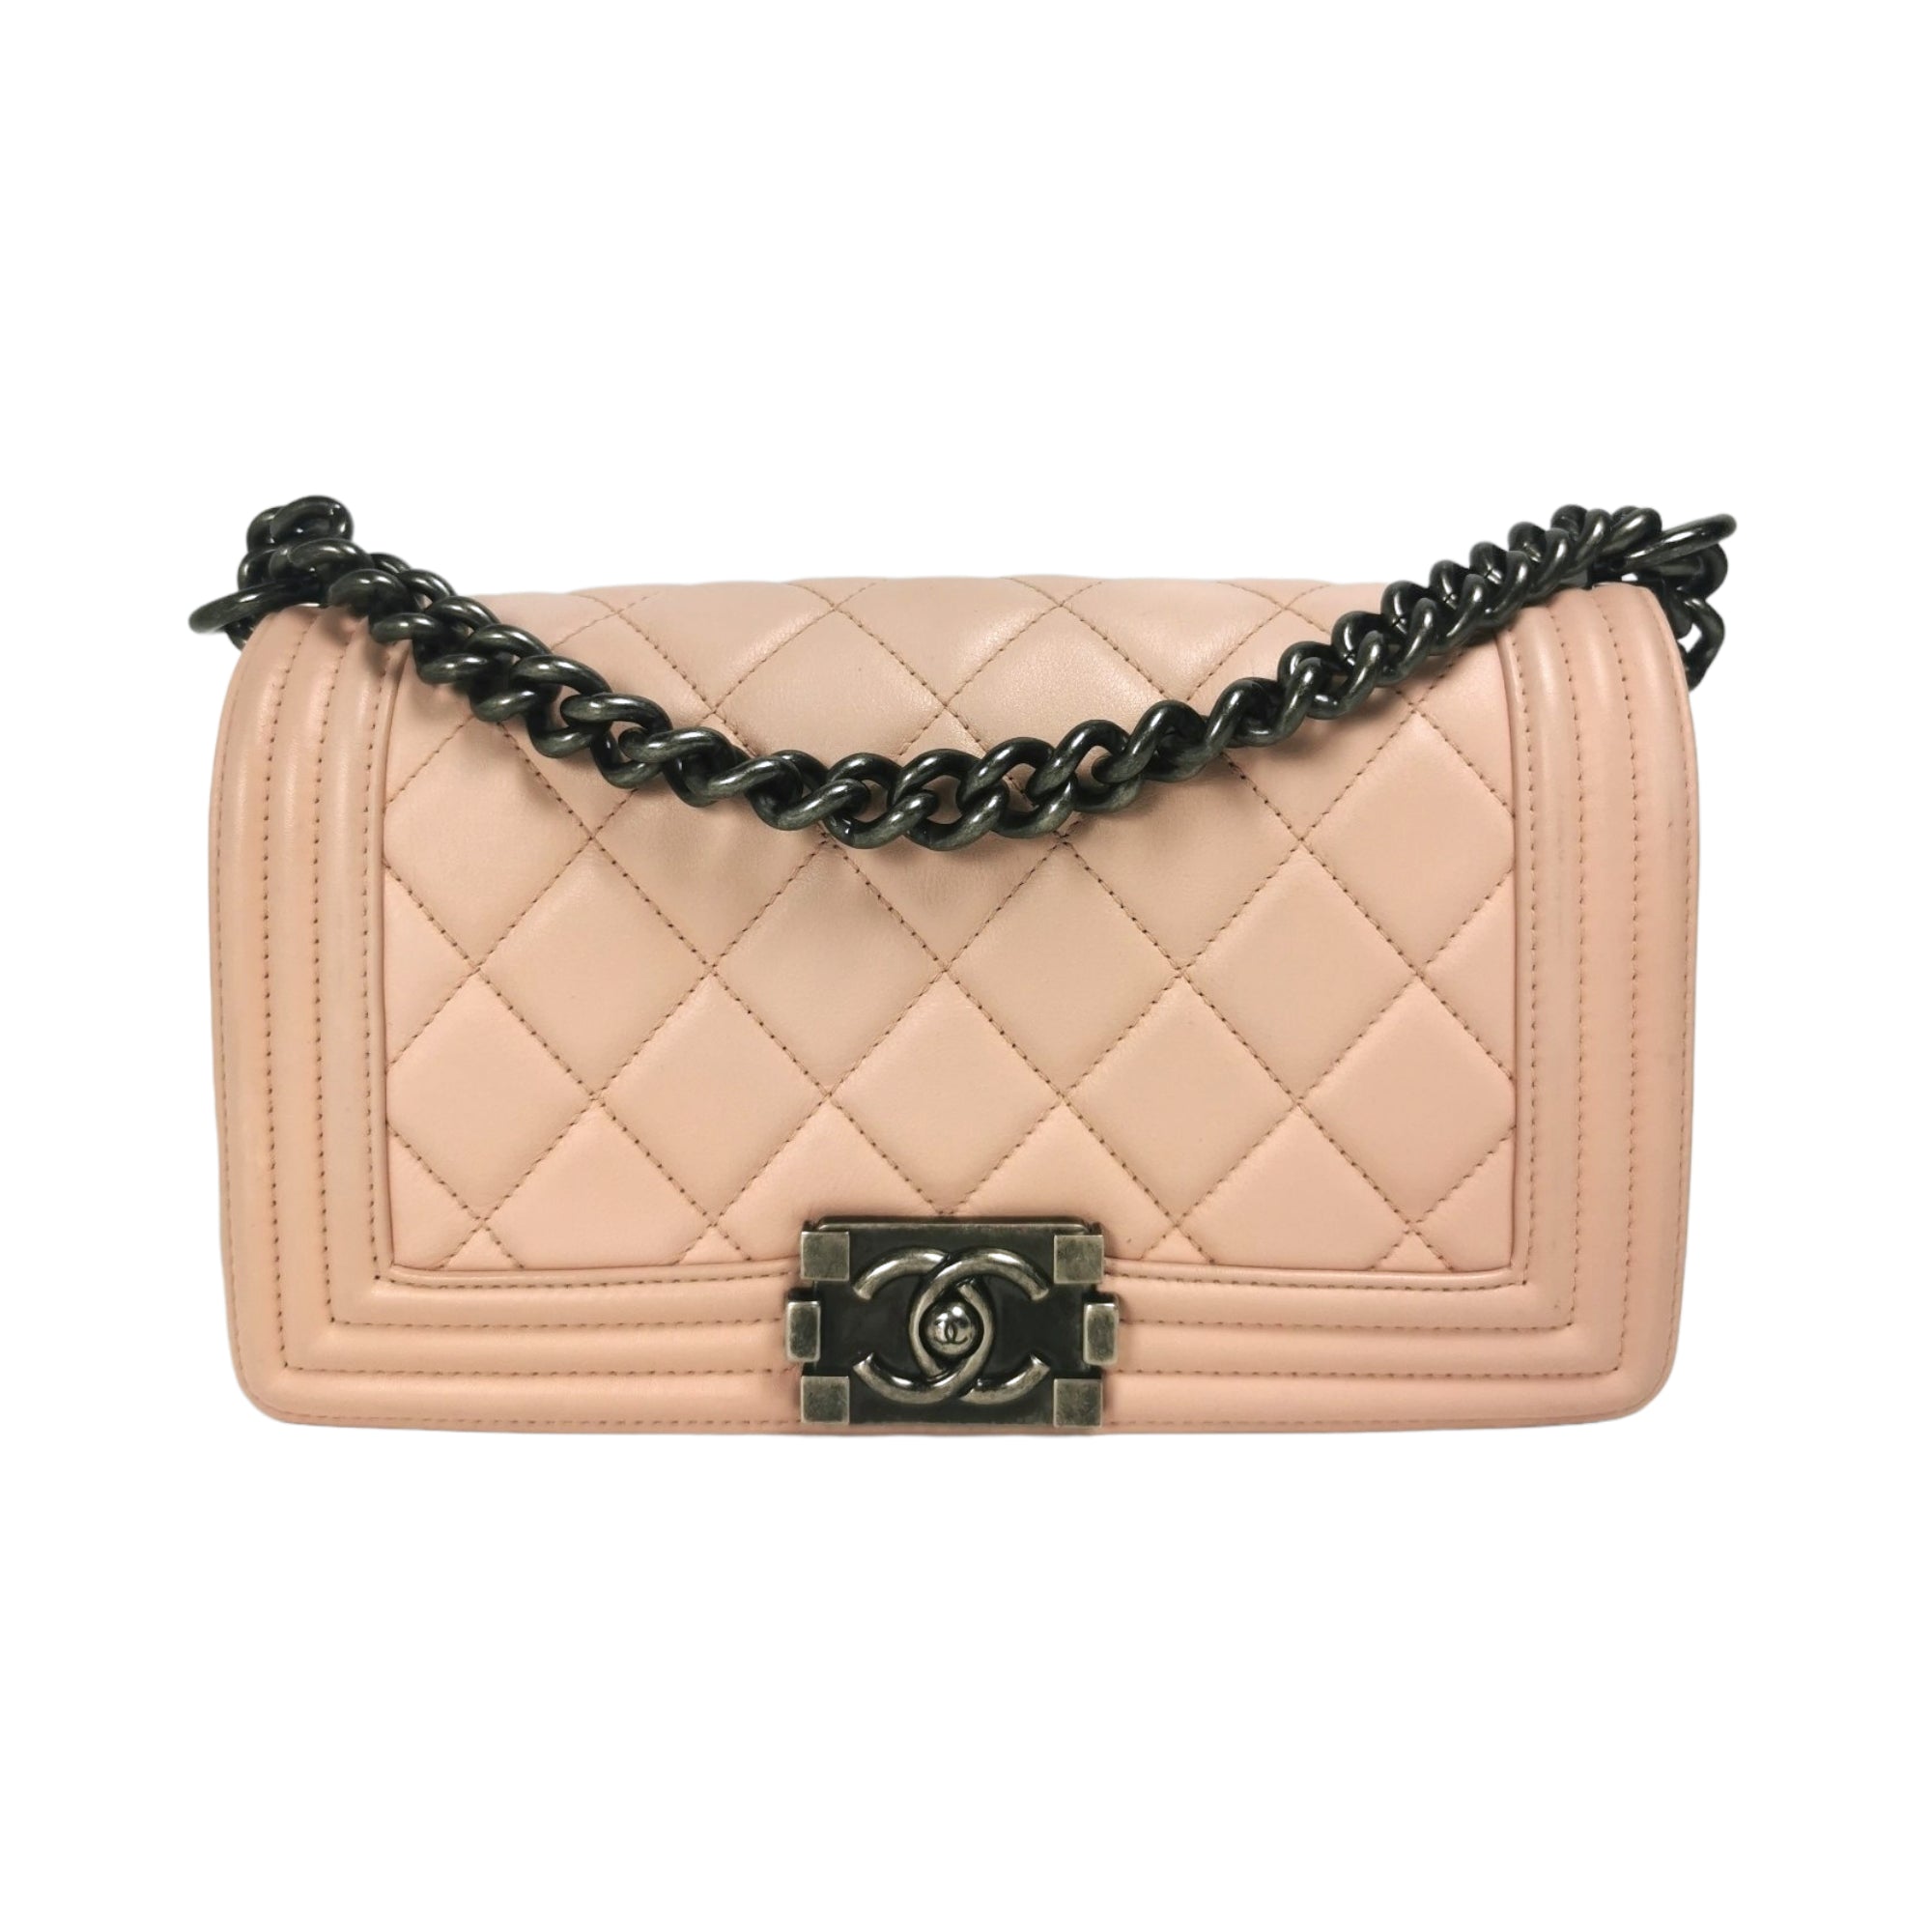 Chanel Classic 255 Medium Flap in Baby Pink Caviar with Gold Hardware   SOLD